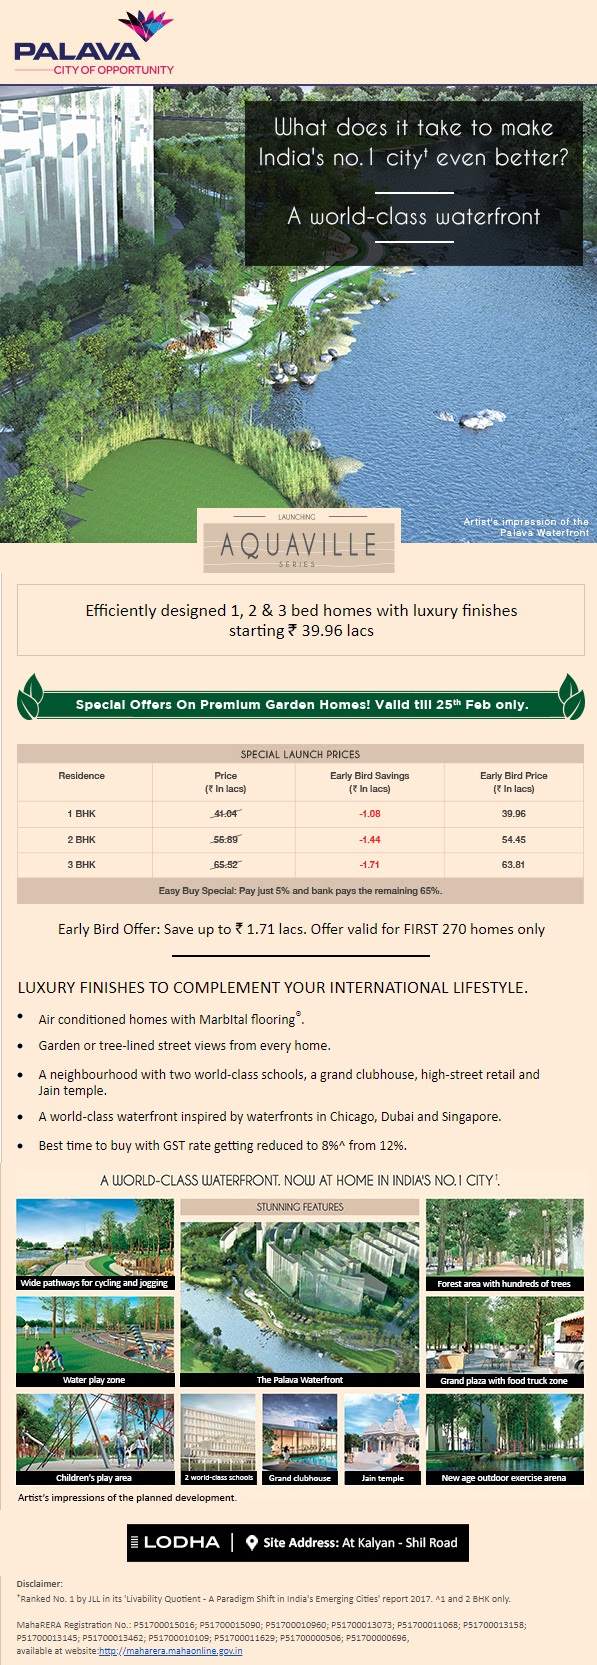 Luxury finishes to complement your international lifestyle at Lodha Palava Aquaville in Mumbai